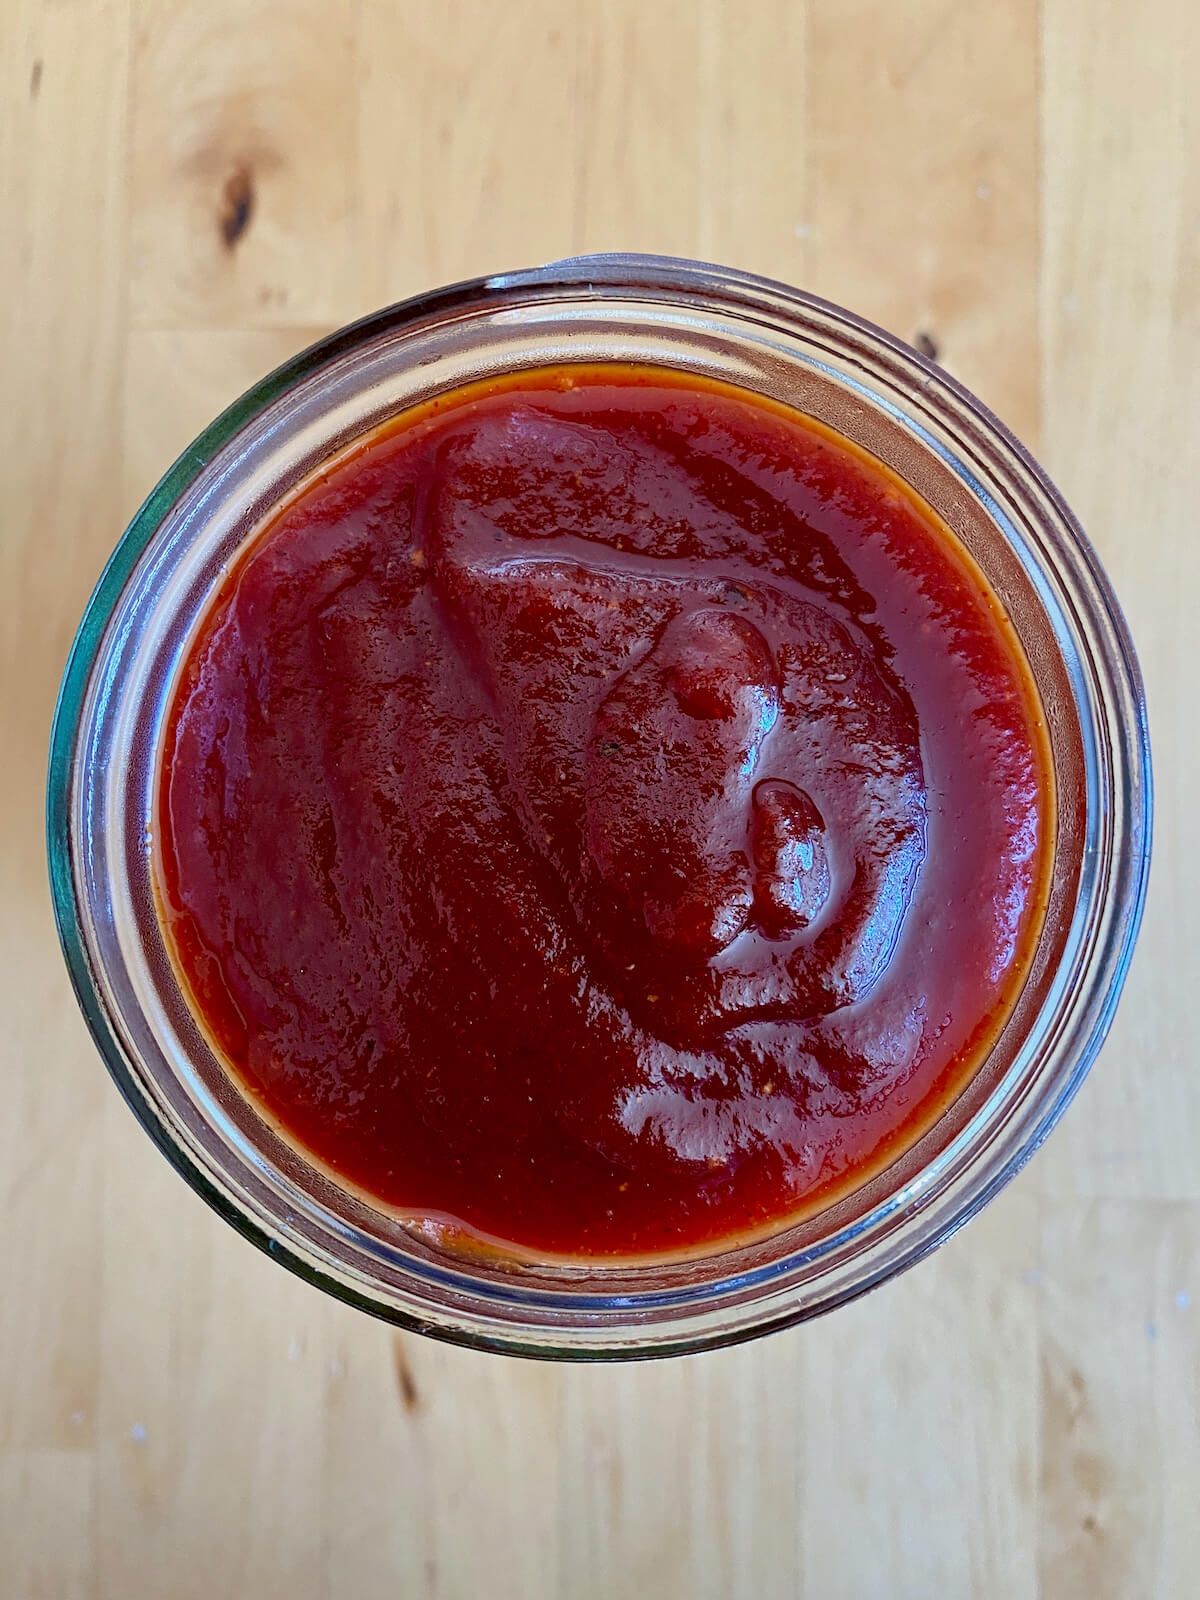 The homemade BBQ sauce in a glass jar on a wooden countertop.